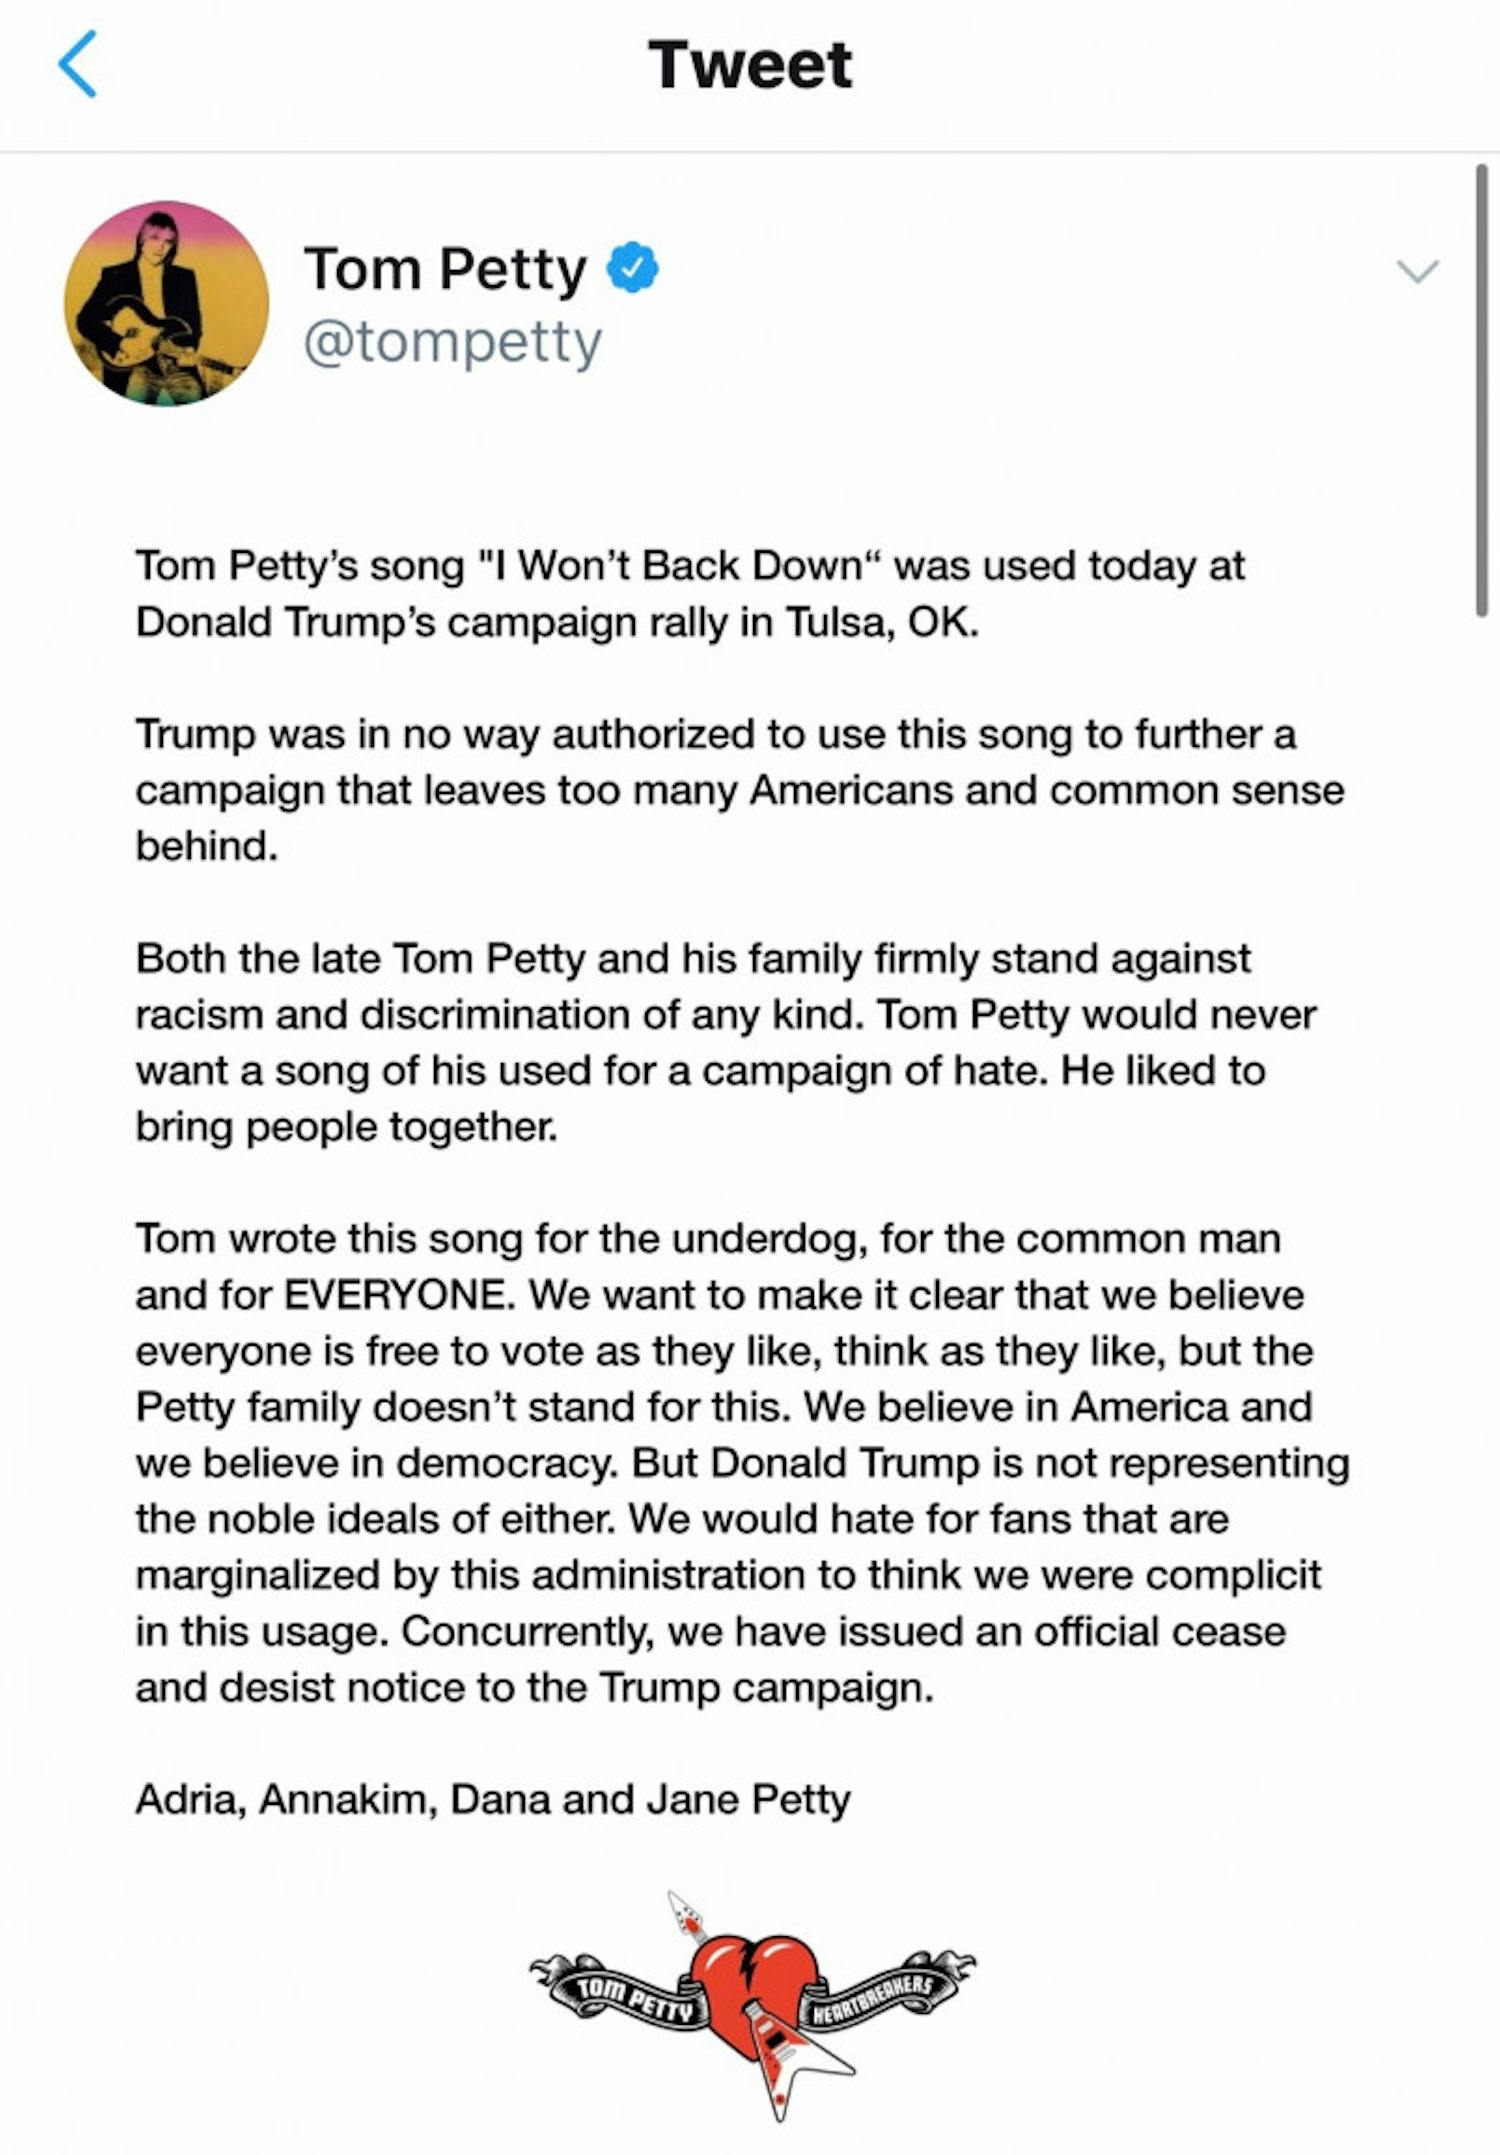 On June 20, the Petty family issued an official cease and desist warning to the Trump campaign regarding the usage of the song “I Won’t Back Down” at an Oklahoma rally.